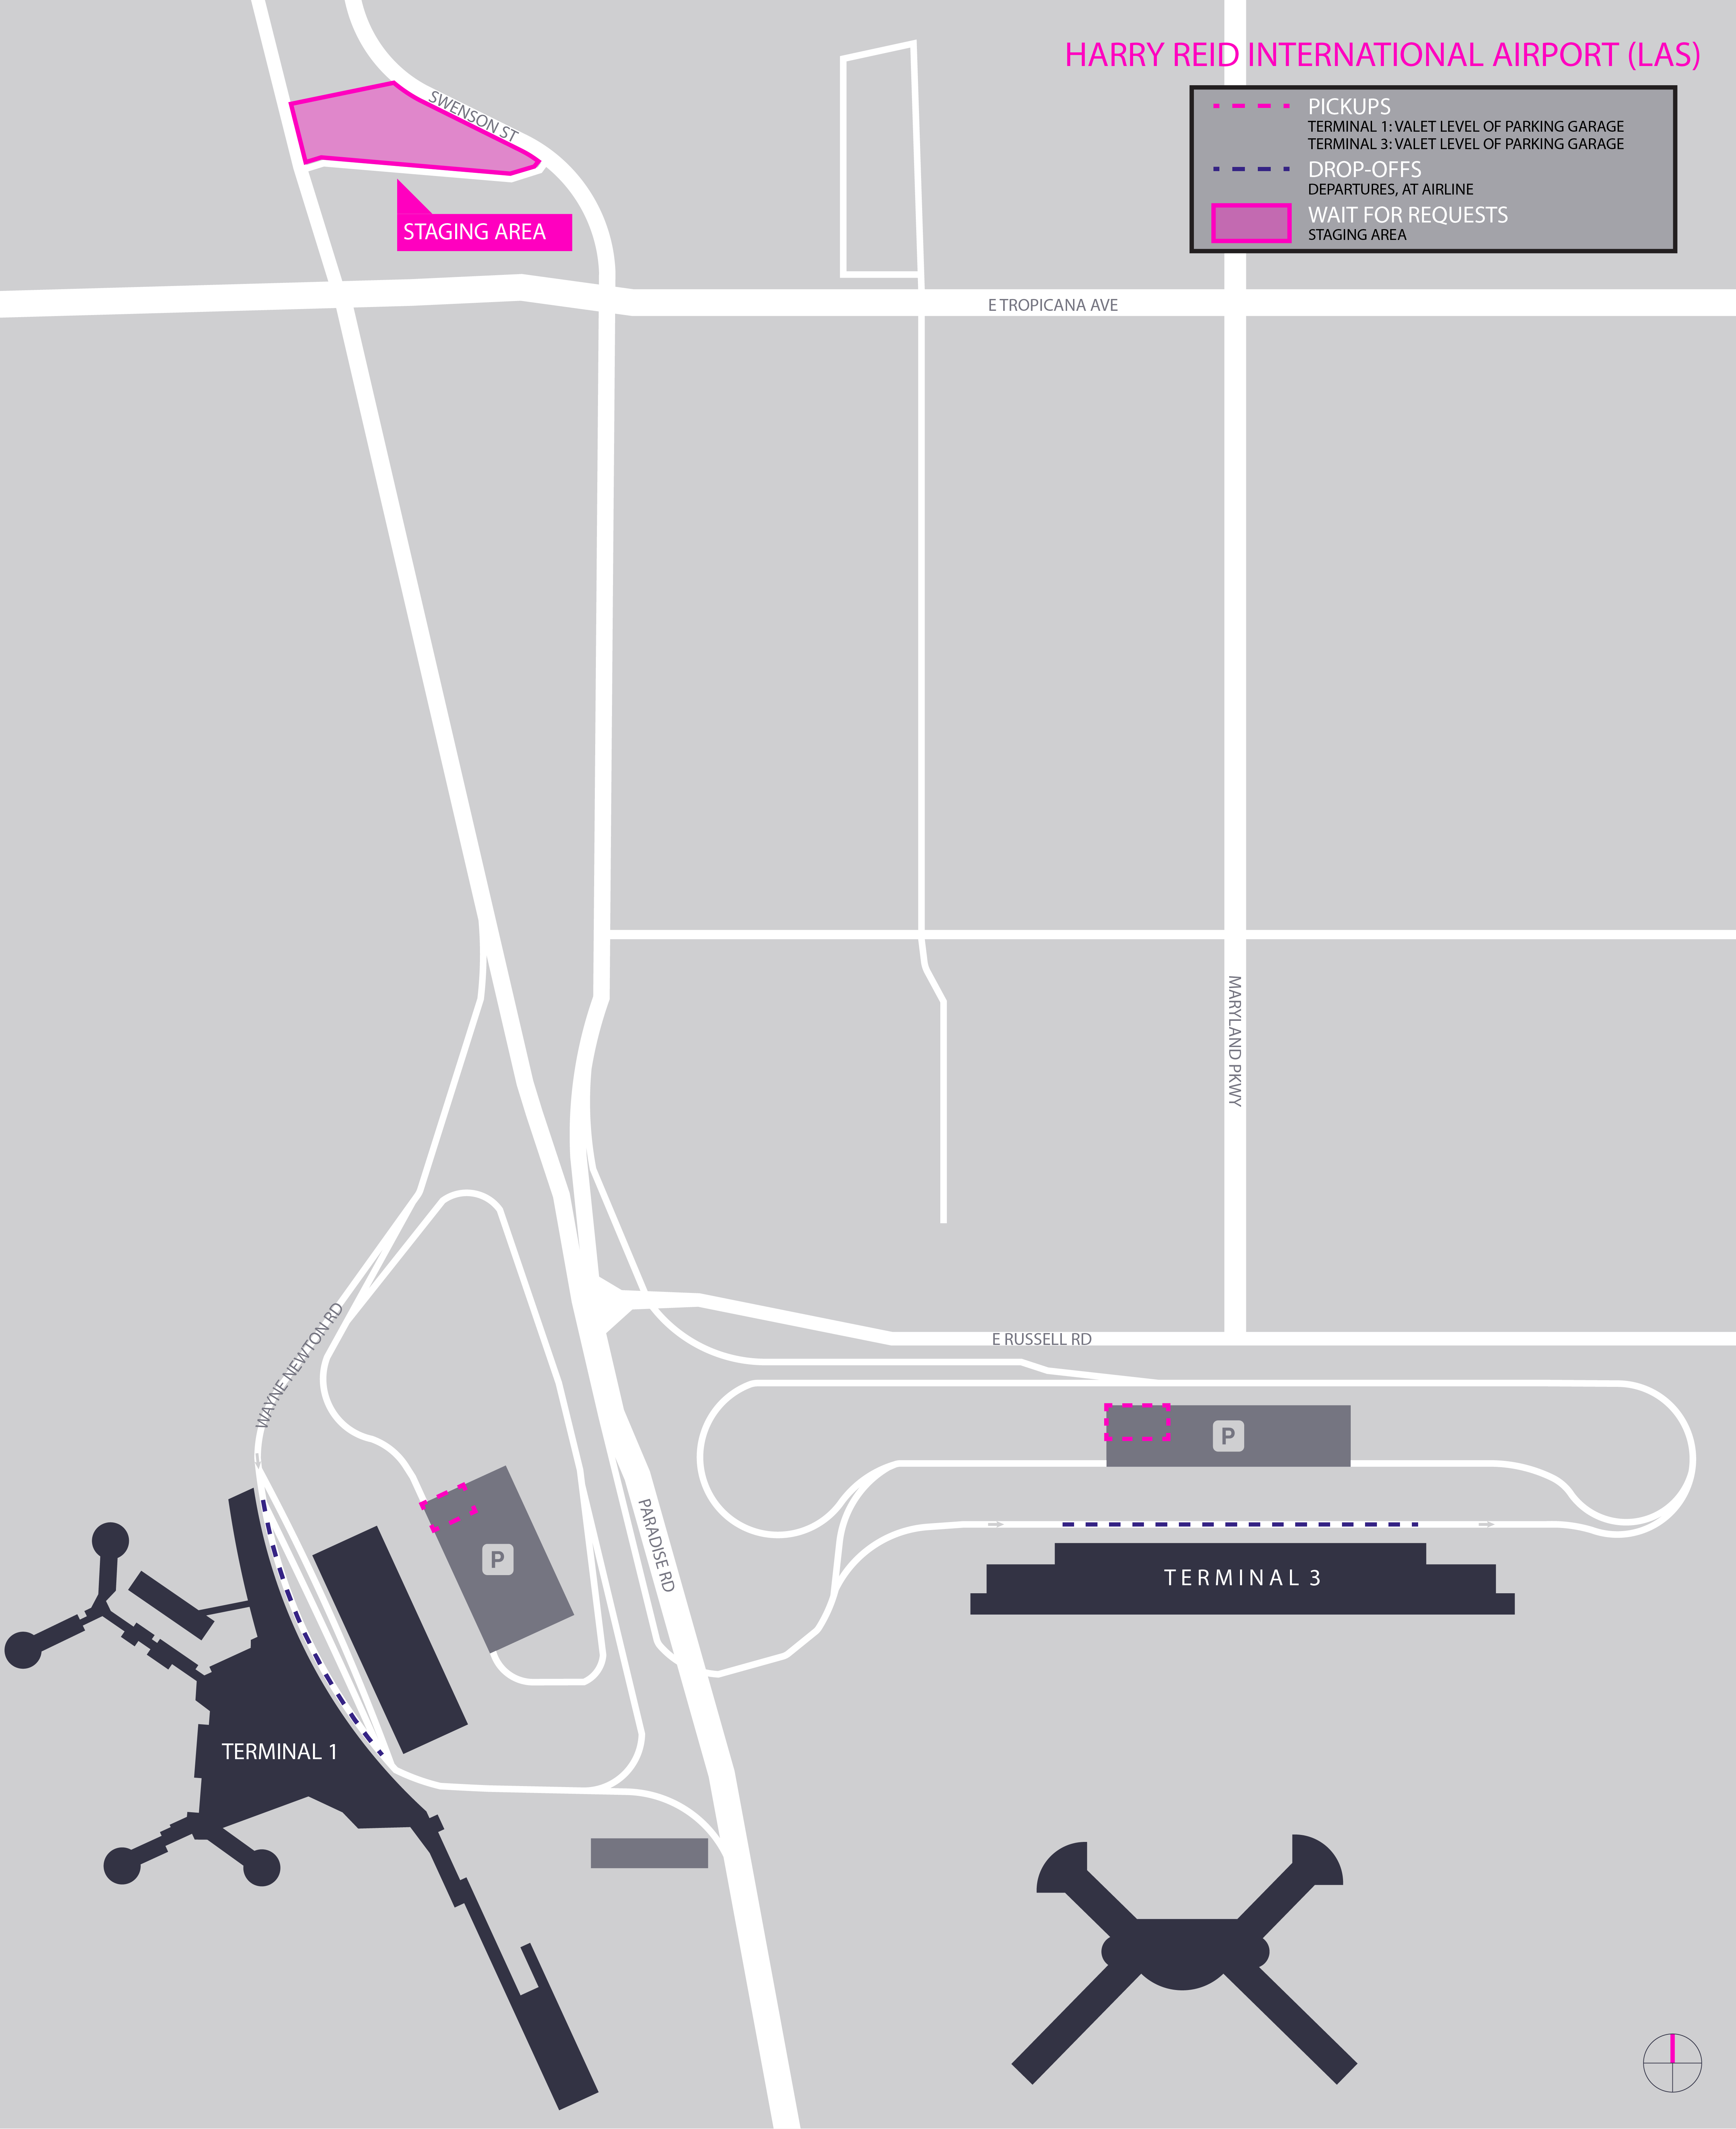 This image is a map of the LAS airport. It includes staging lot, pickup, and drop-off areas.